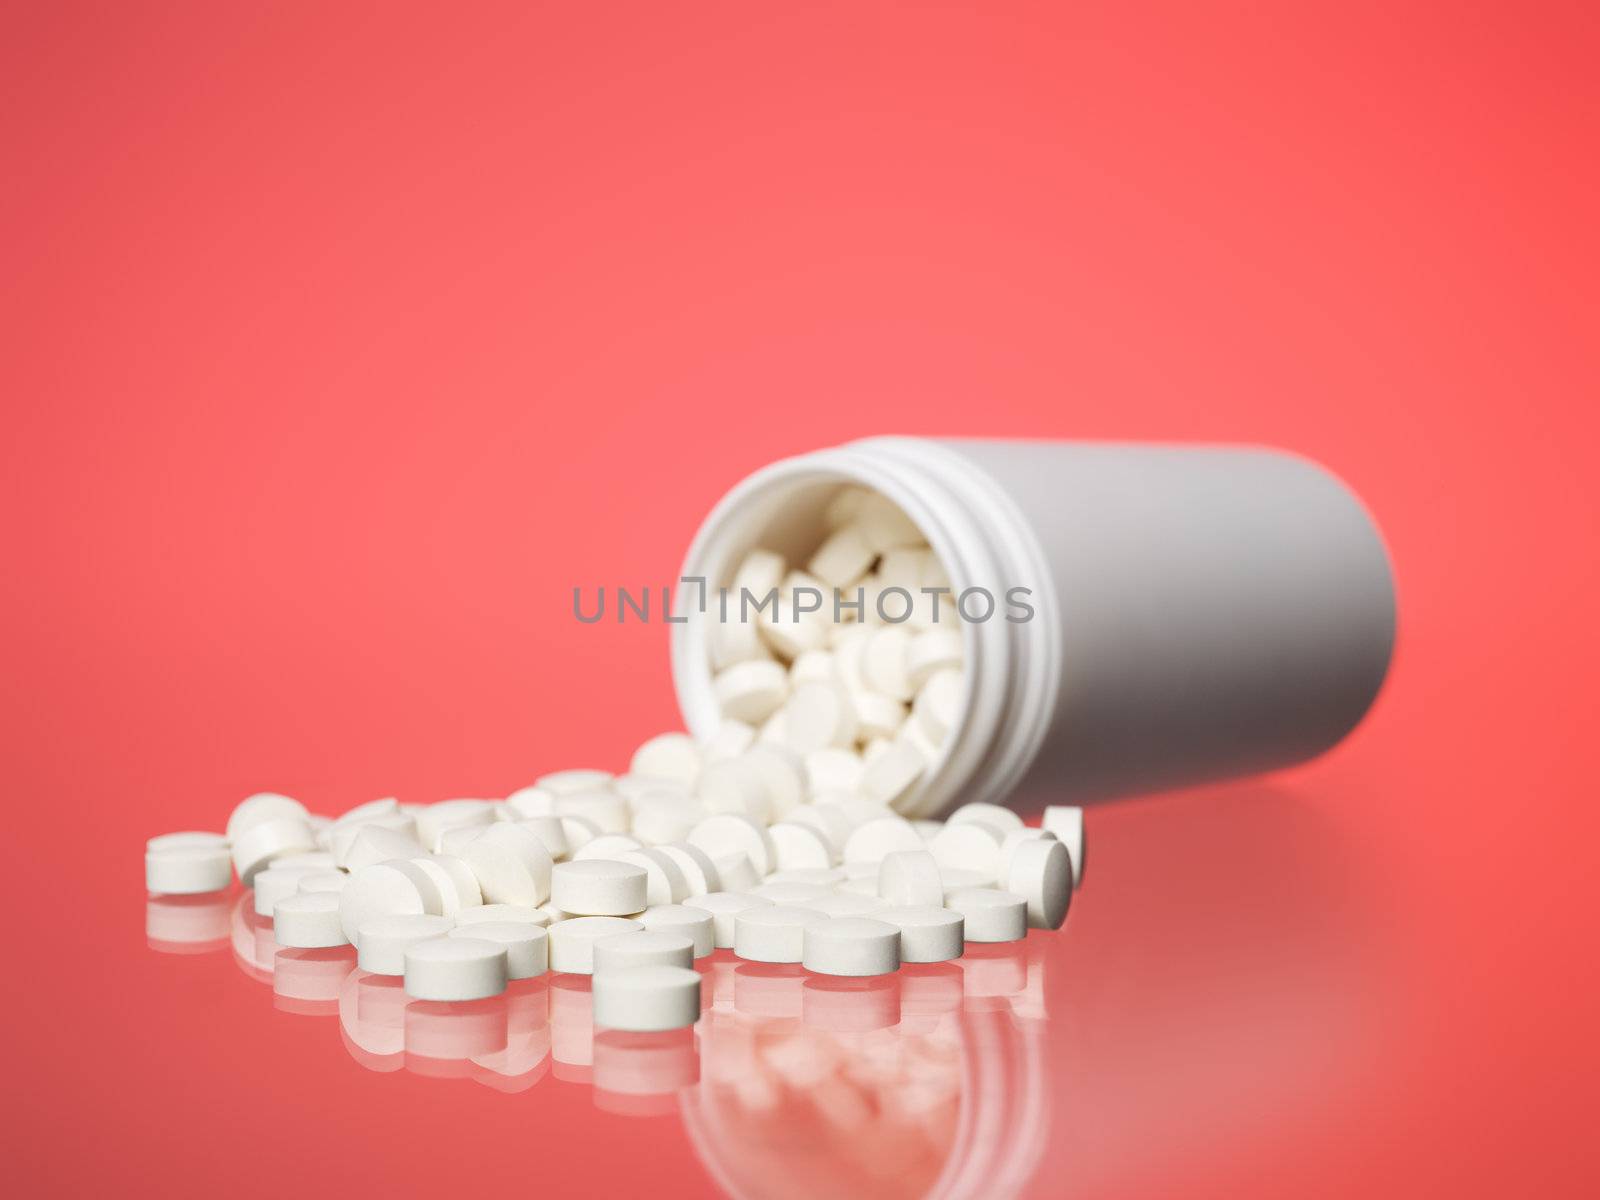 Can with pills towards red background by gemenacom